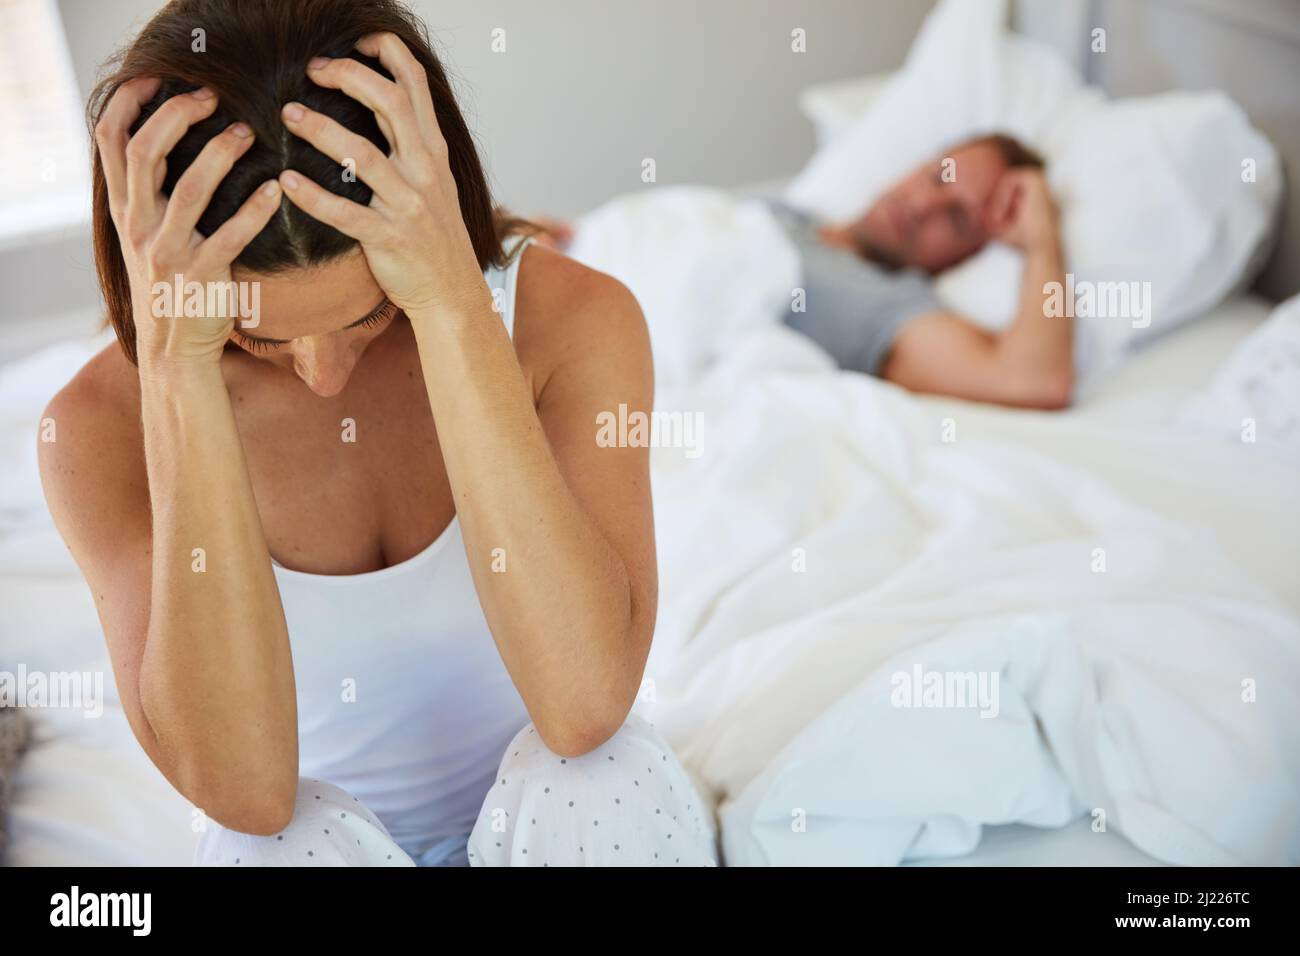 Im so fed up with this constant struggle. Shot of a woman looking upset while her husband sleeps in the background. Stock Photo